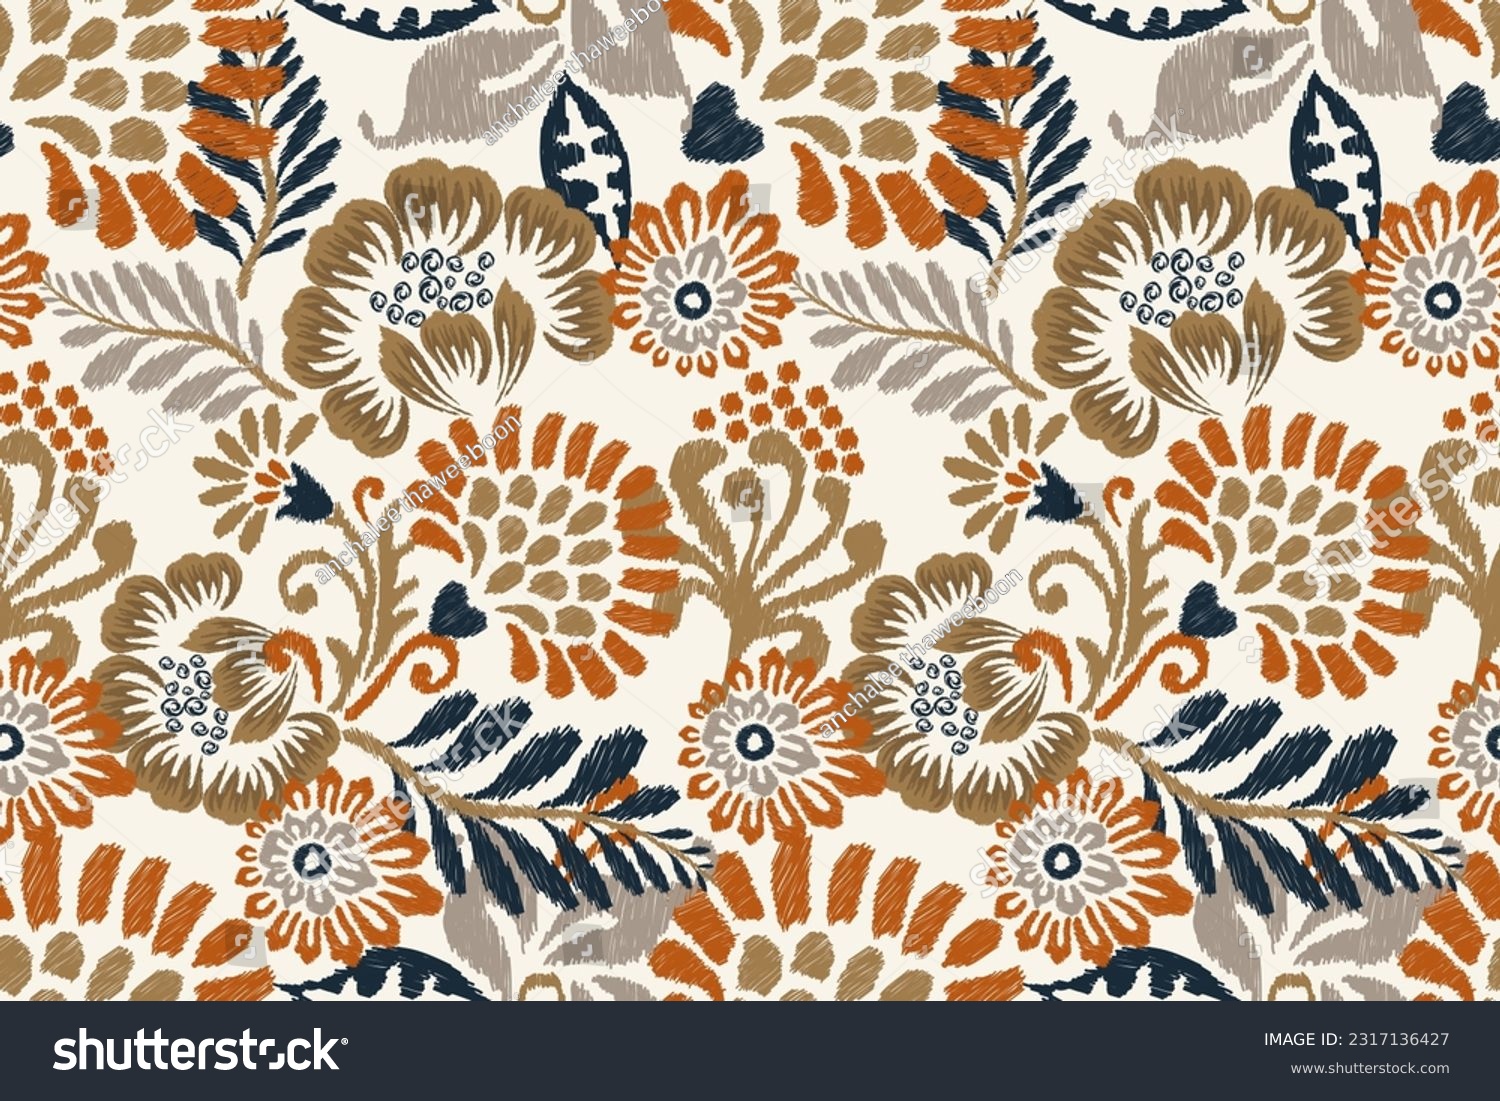 Ikat floral paisley embroidery on white background.Ikat ethnic oriental seamless pattern traditional.Aztec style abstract vector illustration.design for texture,fabric,clothing,wrapping,decoration. #2317136427